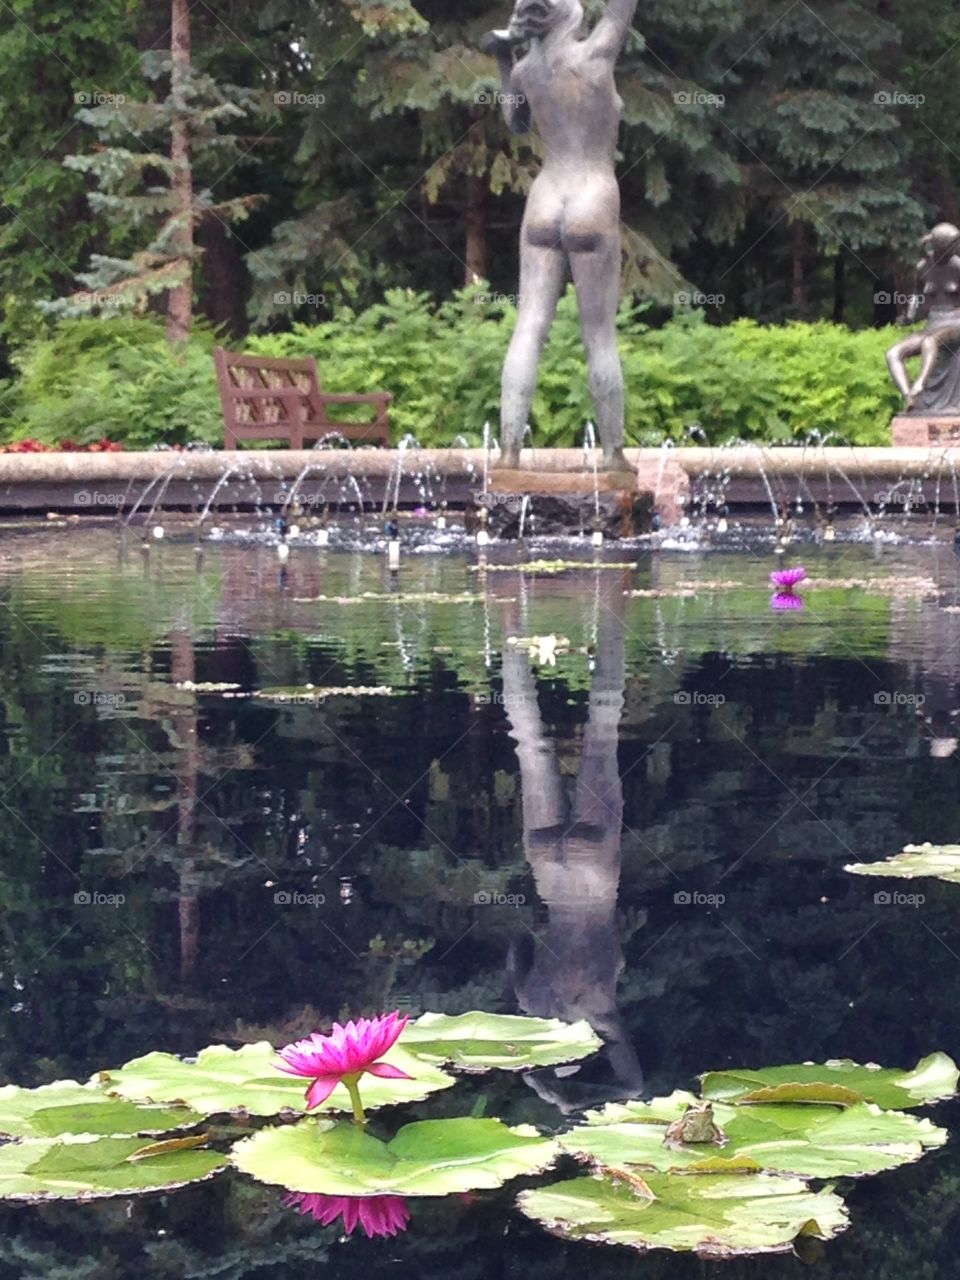 Lotus flower shadowing a woman's reflection in a pond